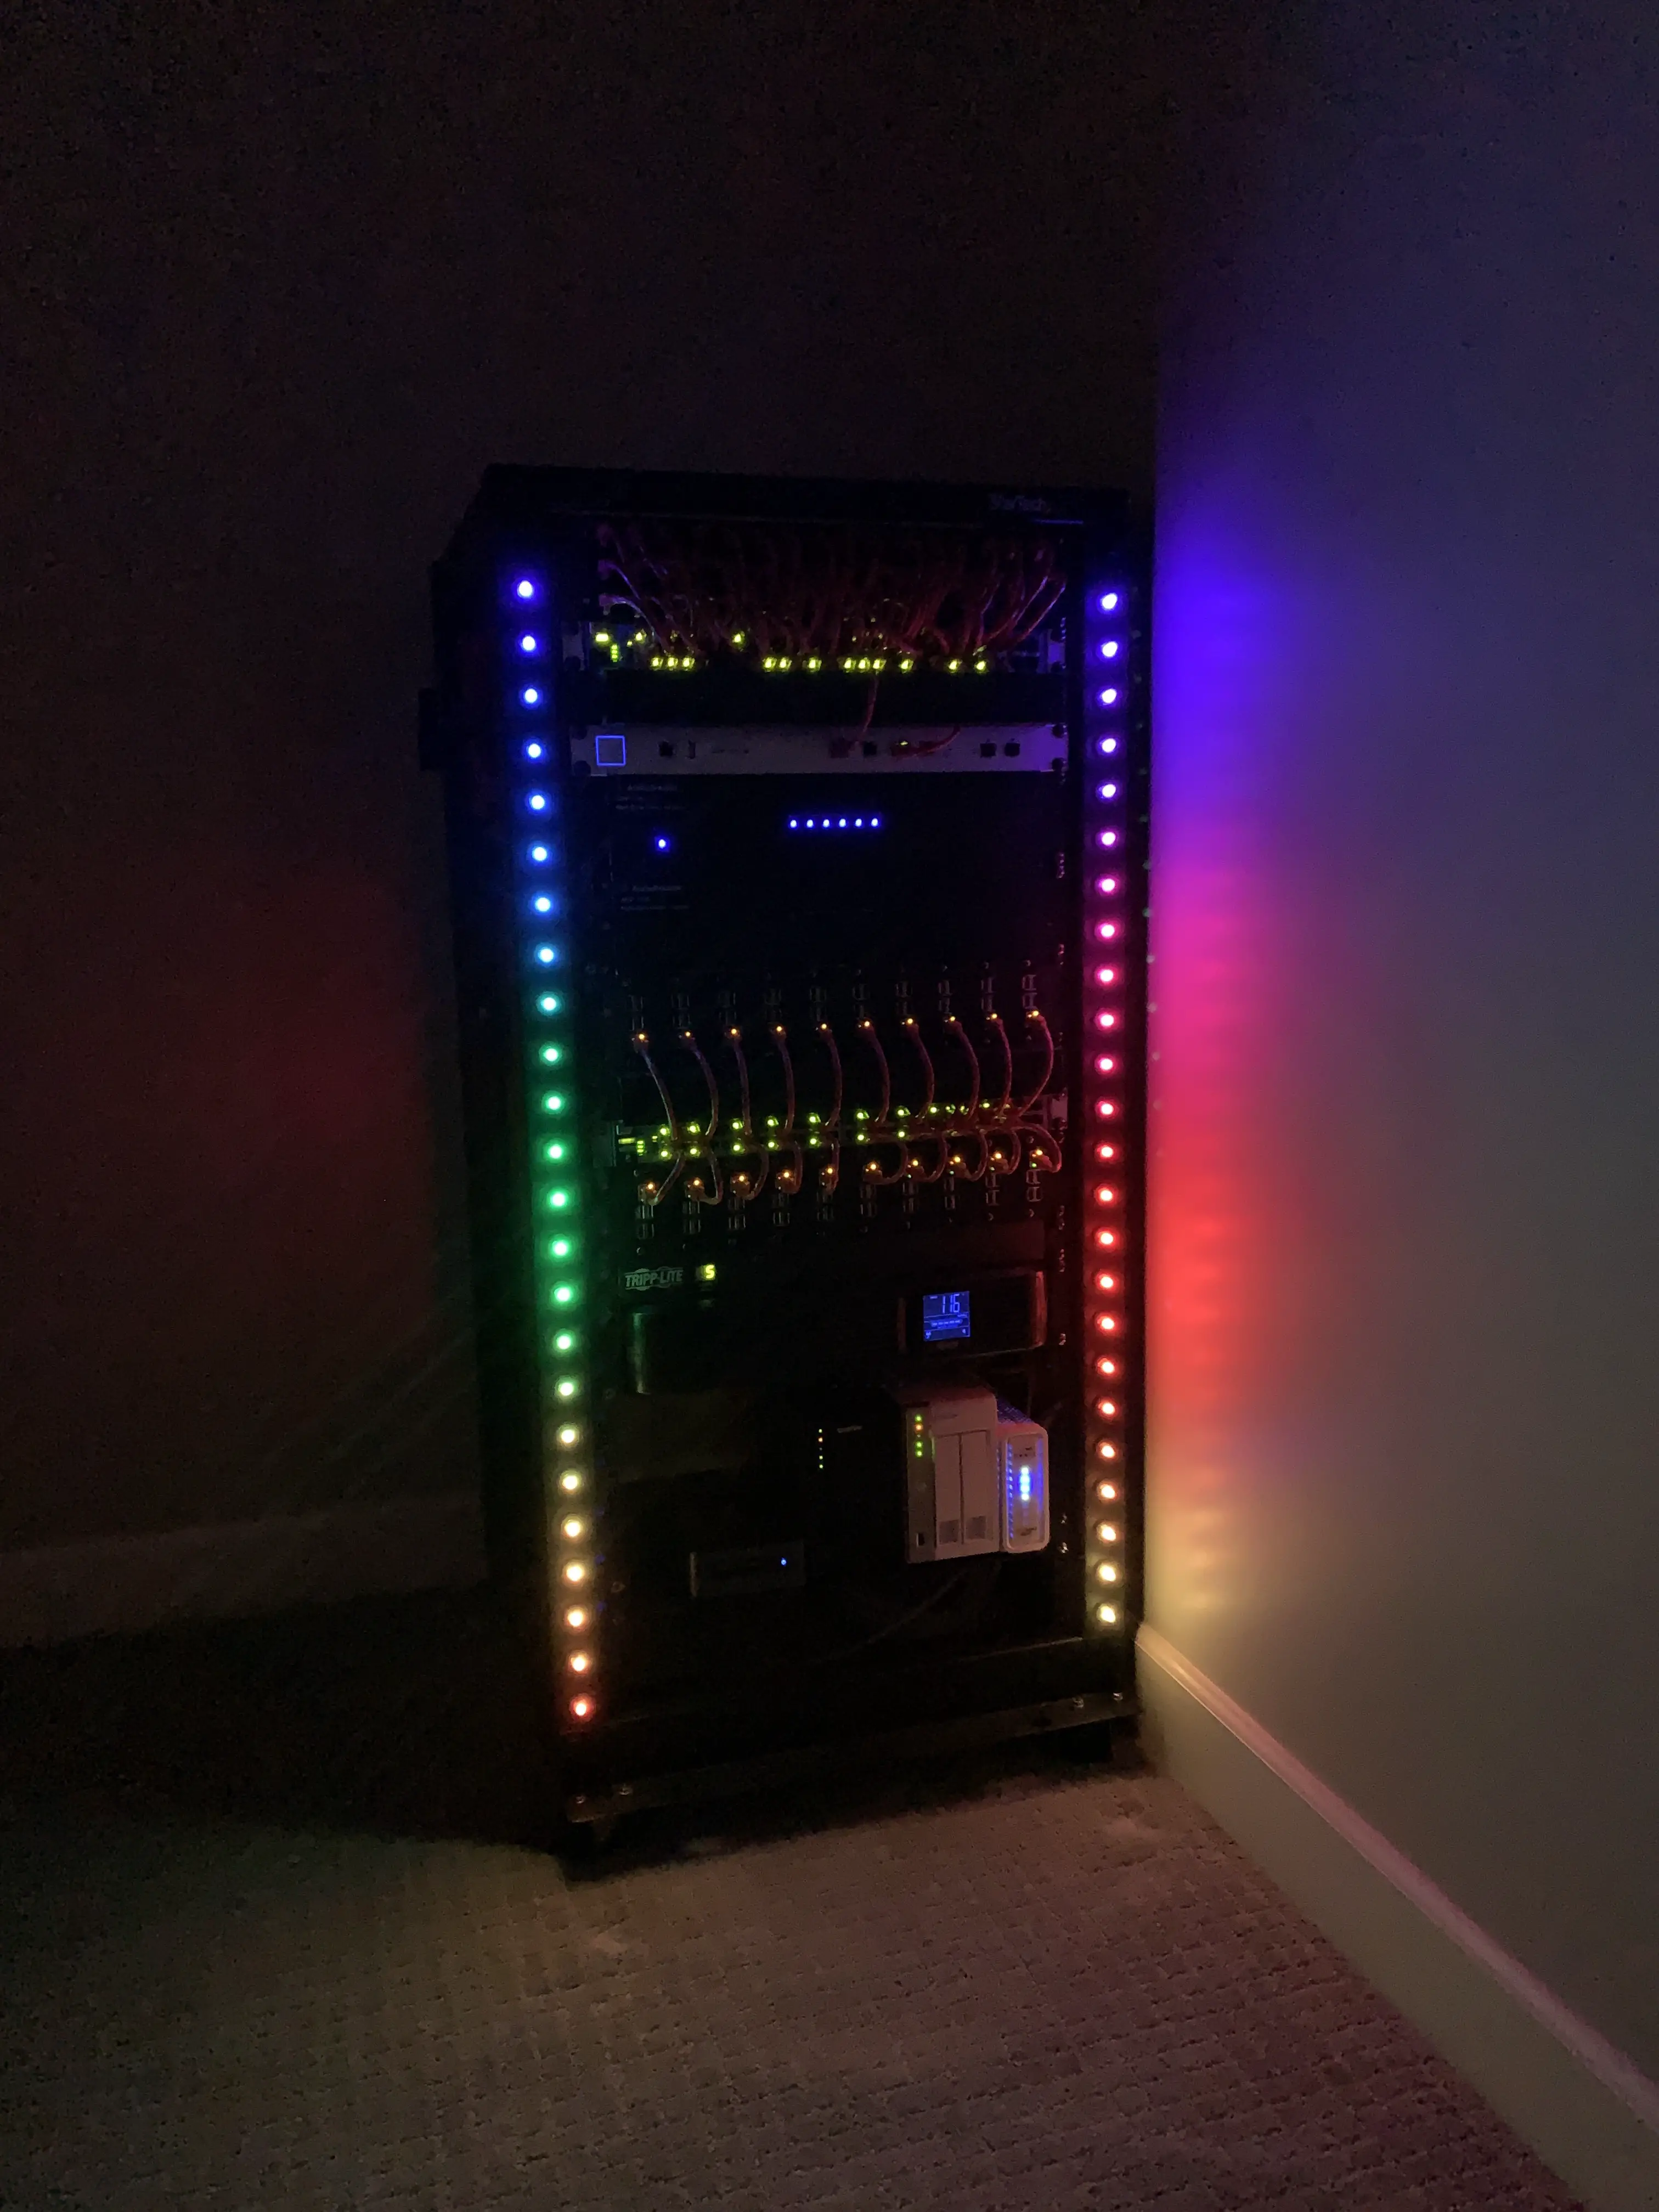 Server rack with multi-colored LEDs